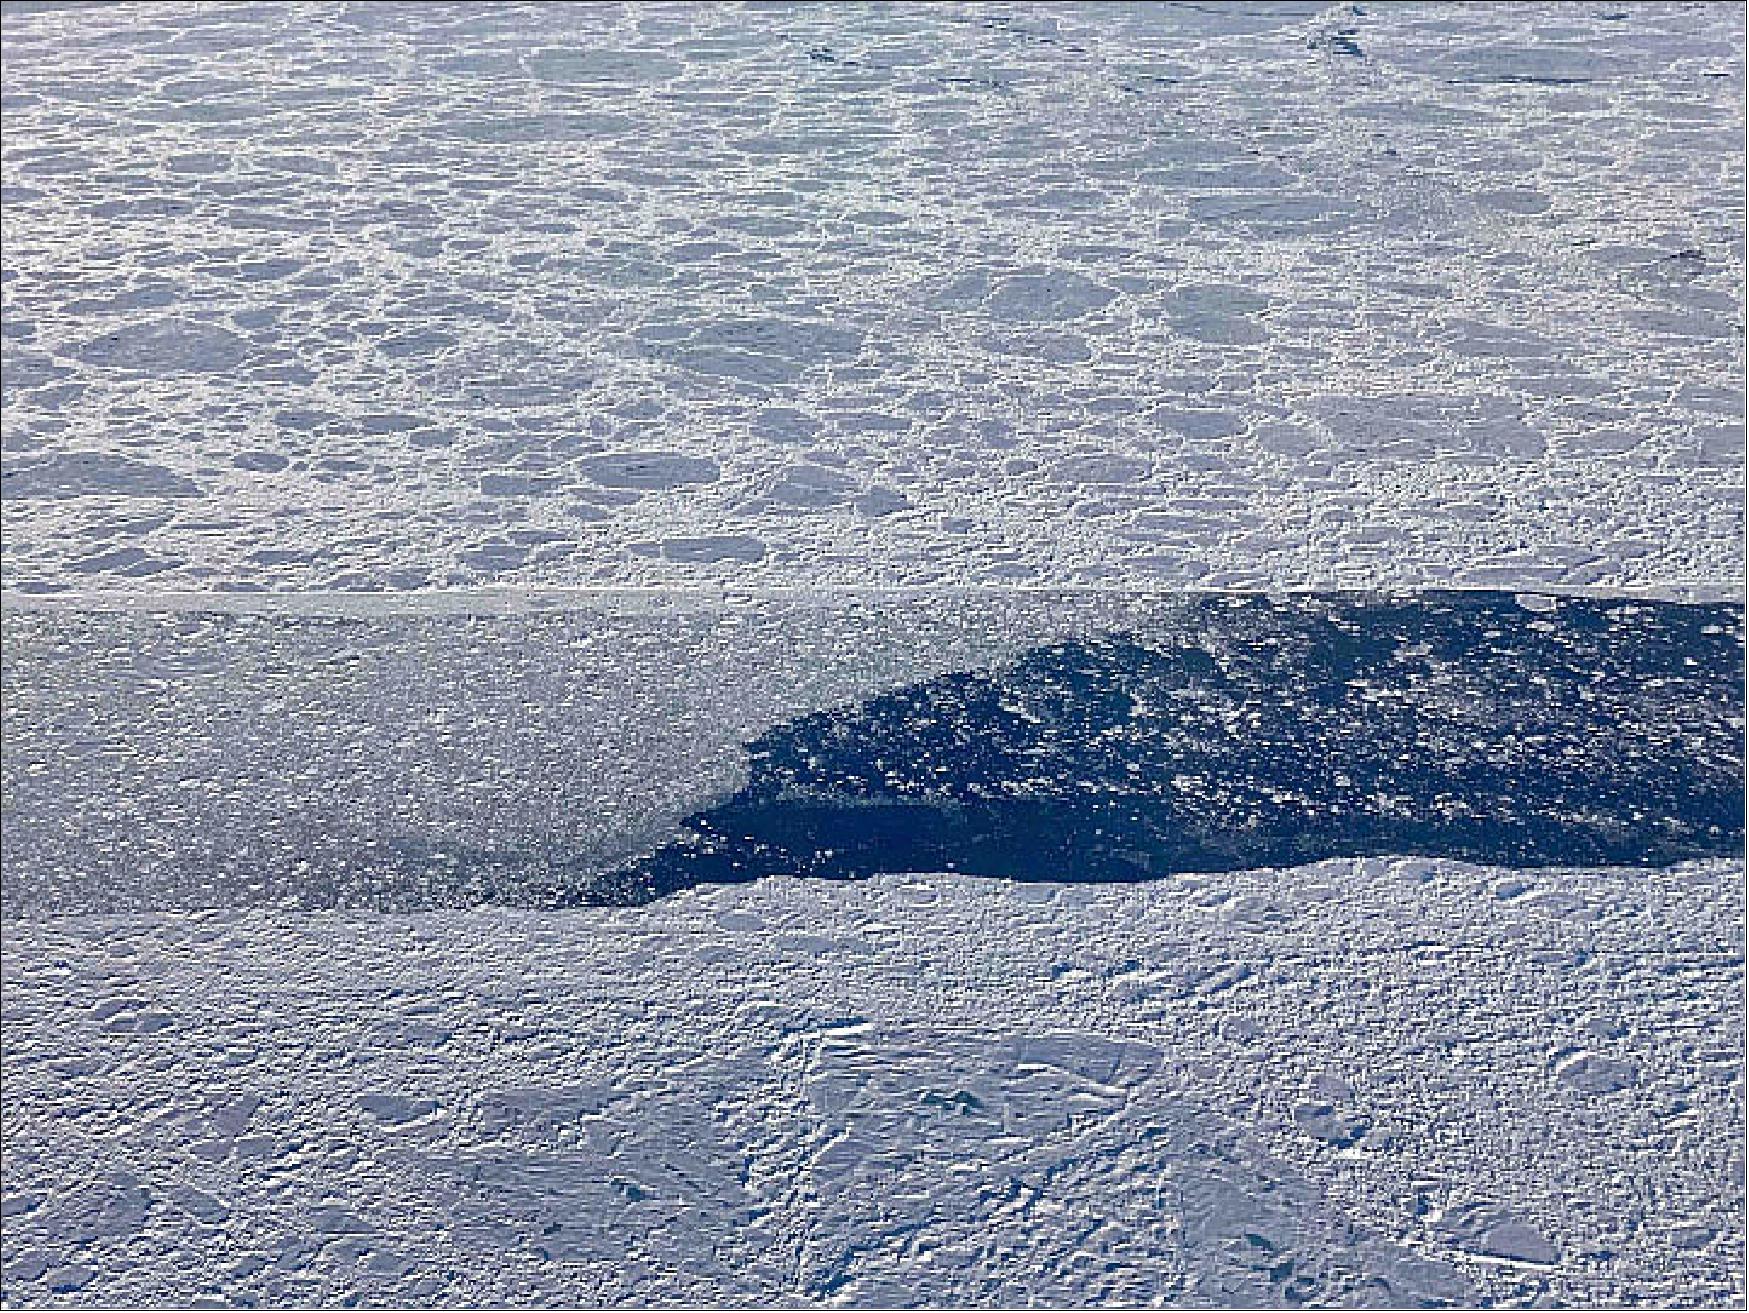 Figure 29: This photo, taken during an Operation IceBridge flight on September 9, 2019, shows an opening in the sea ice cover north of Greenland. The lead is partially filled by much smaller sea ice rubble and floes (image credit: NASA Earth Observatory, photograph by Linette Boisvert. Story by Maria-José Viñas, NASA’s Earth Science News Team)